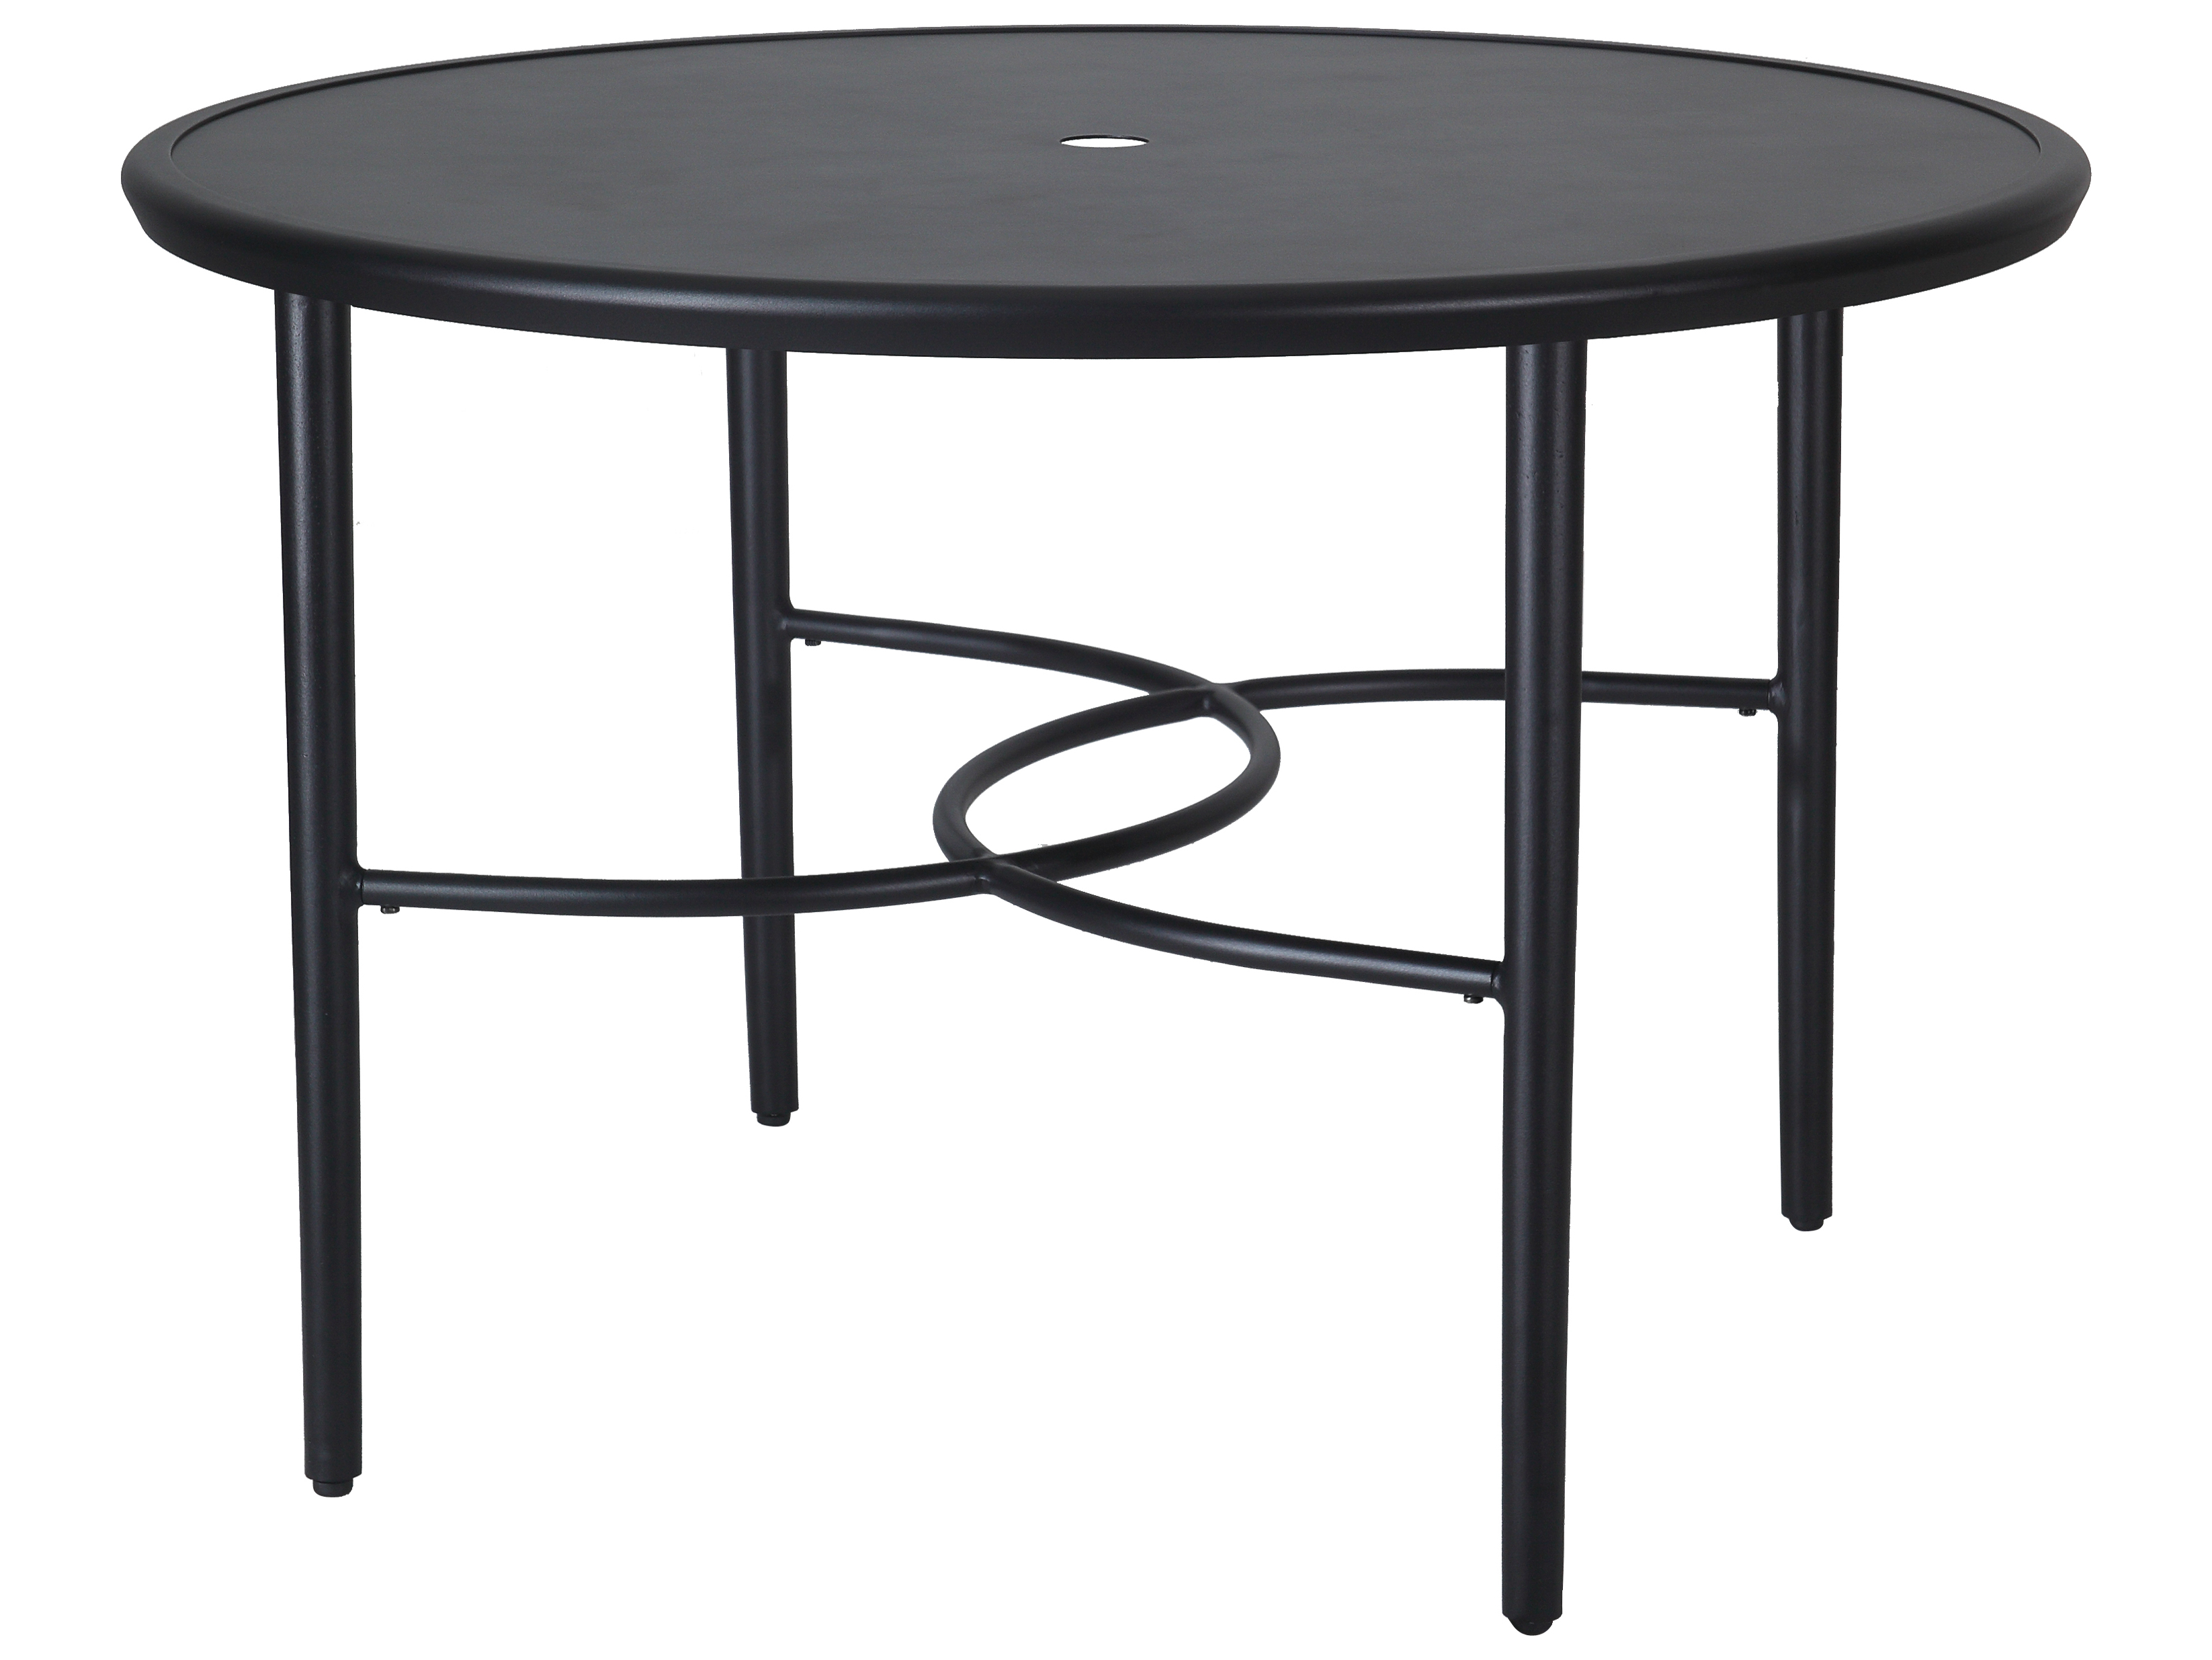 Gensun Talia 48'' Wide Round with Aluminum Top Dining Table with Umbrella  Hole | GES10440A48